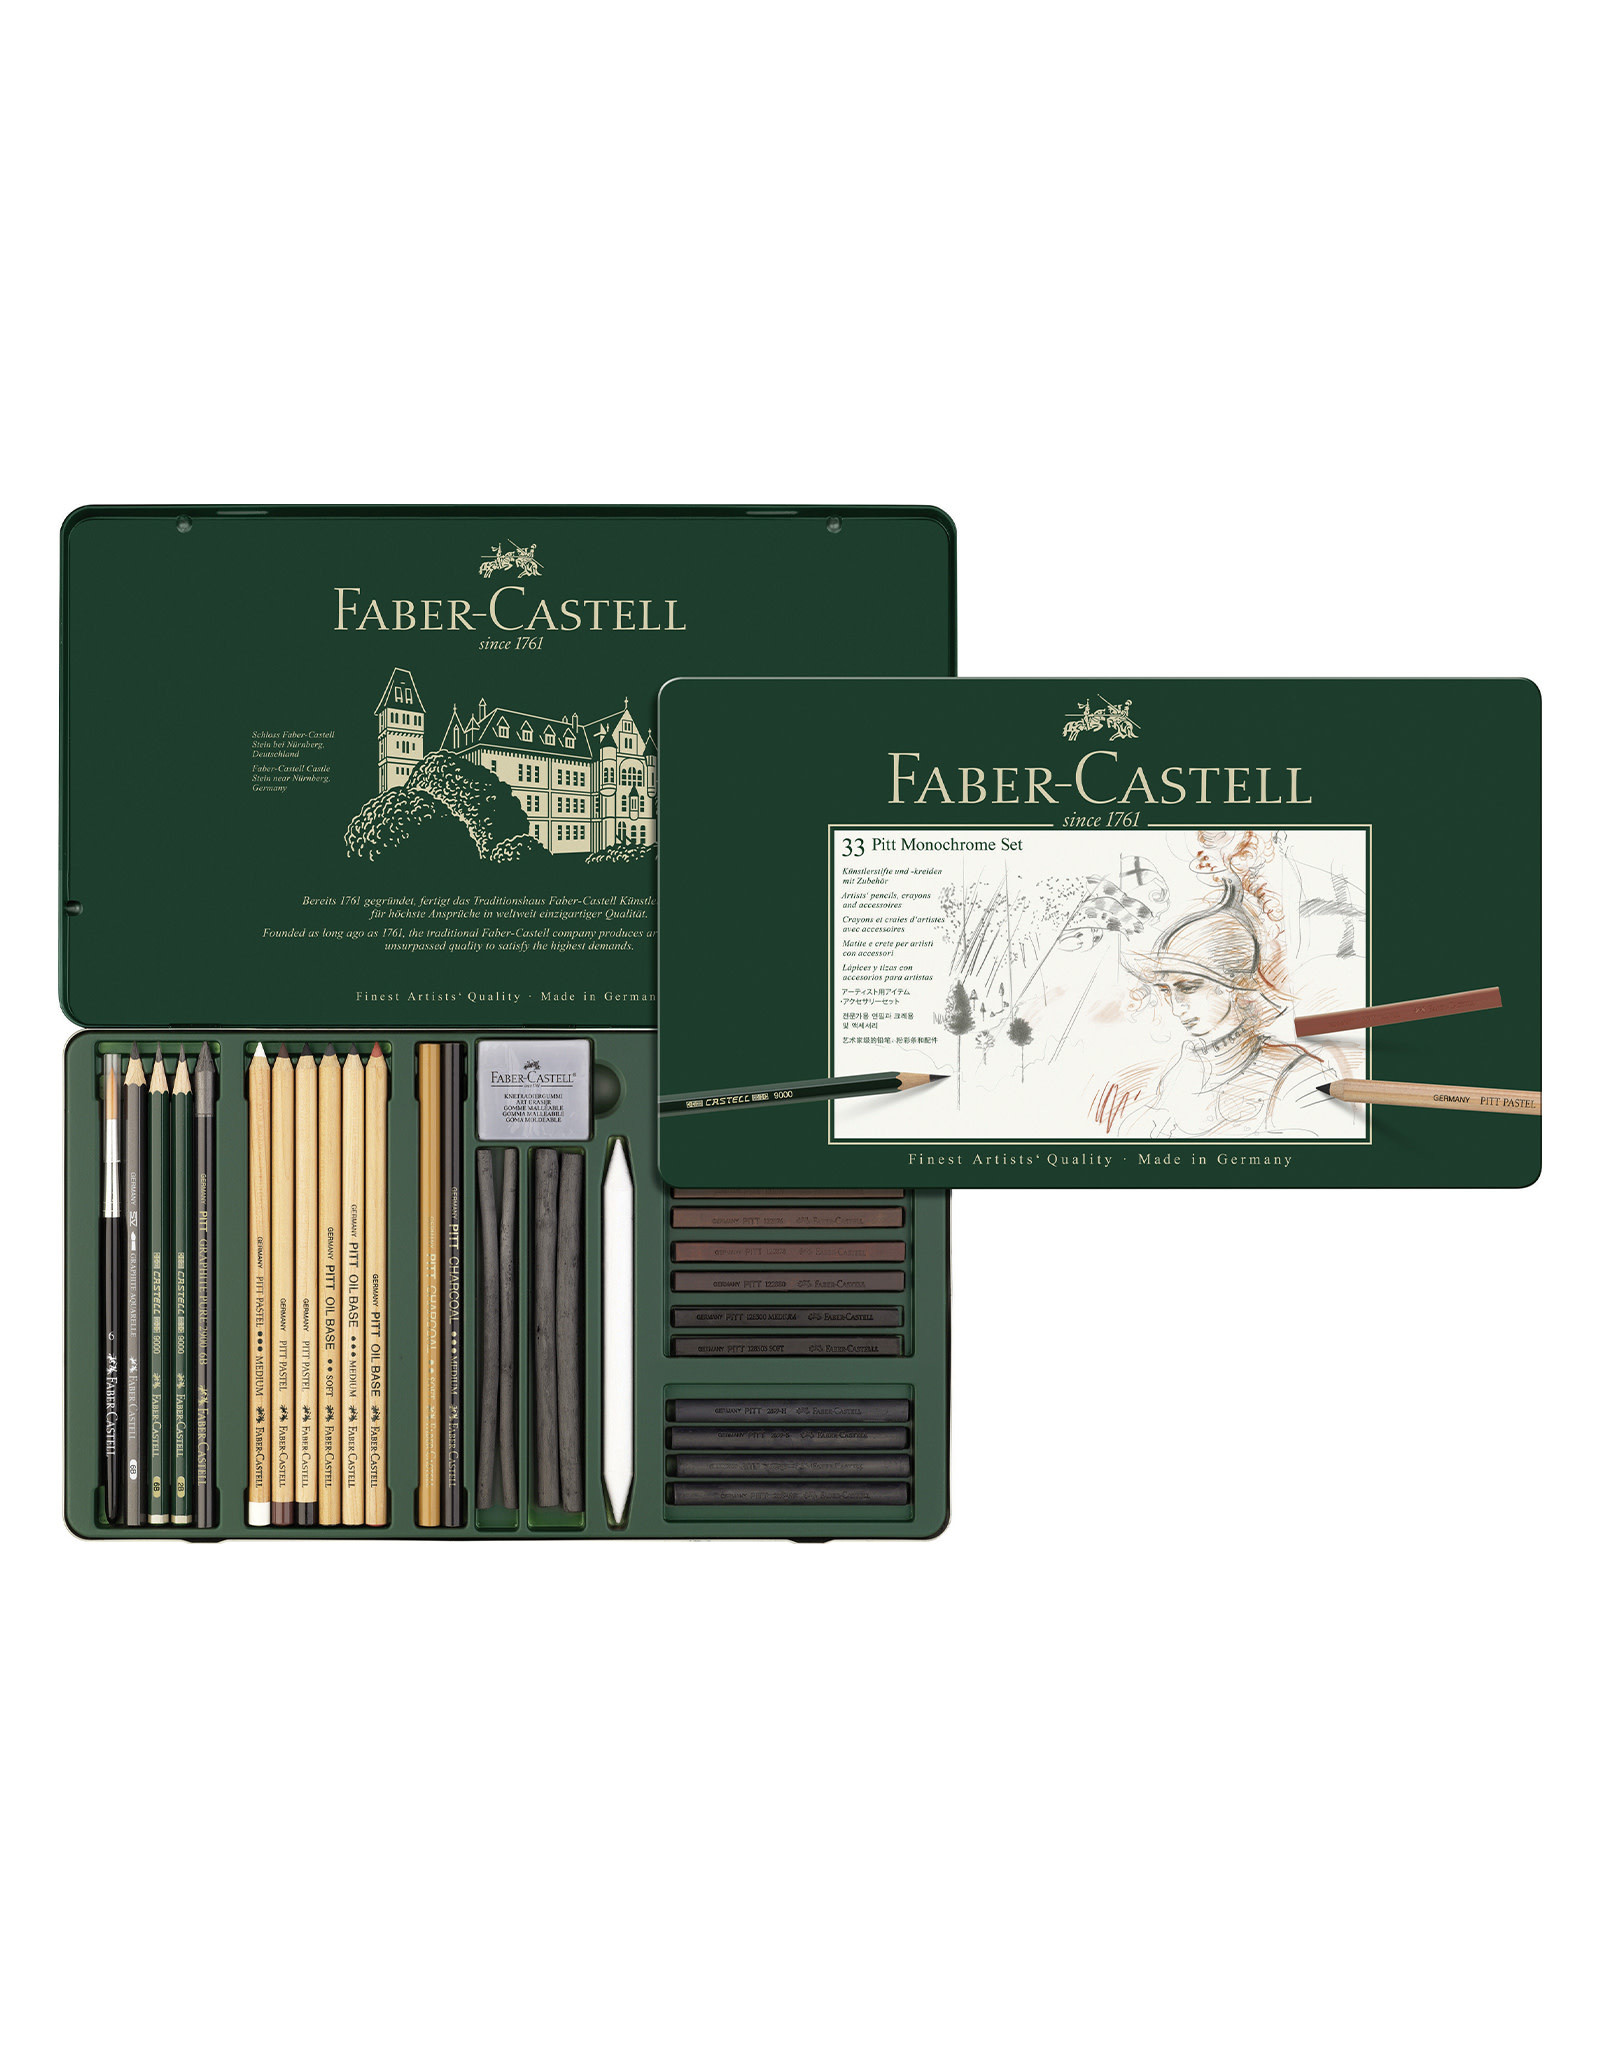 Faber Castell Graphite - The Art Store/Commercial Art Supply